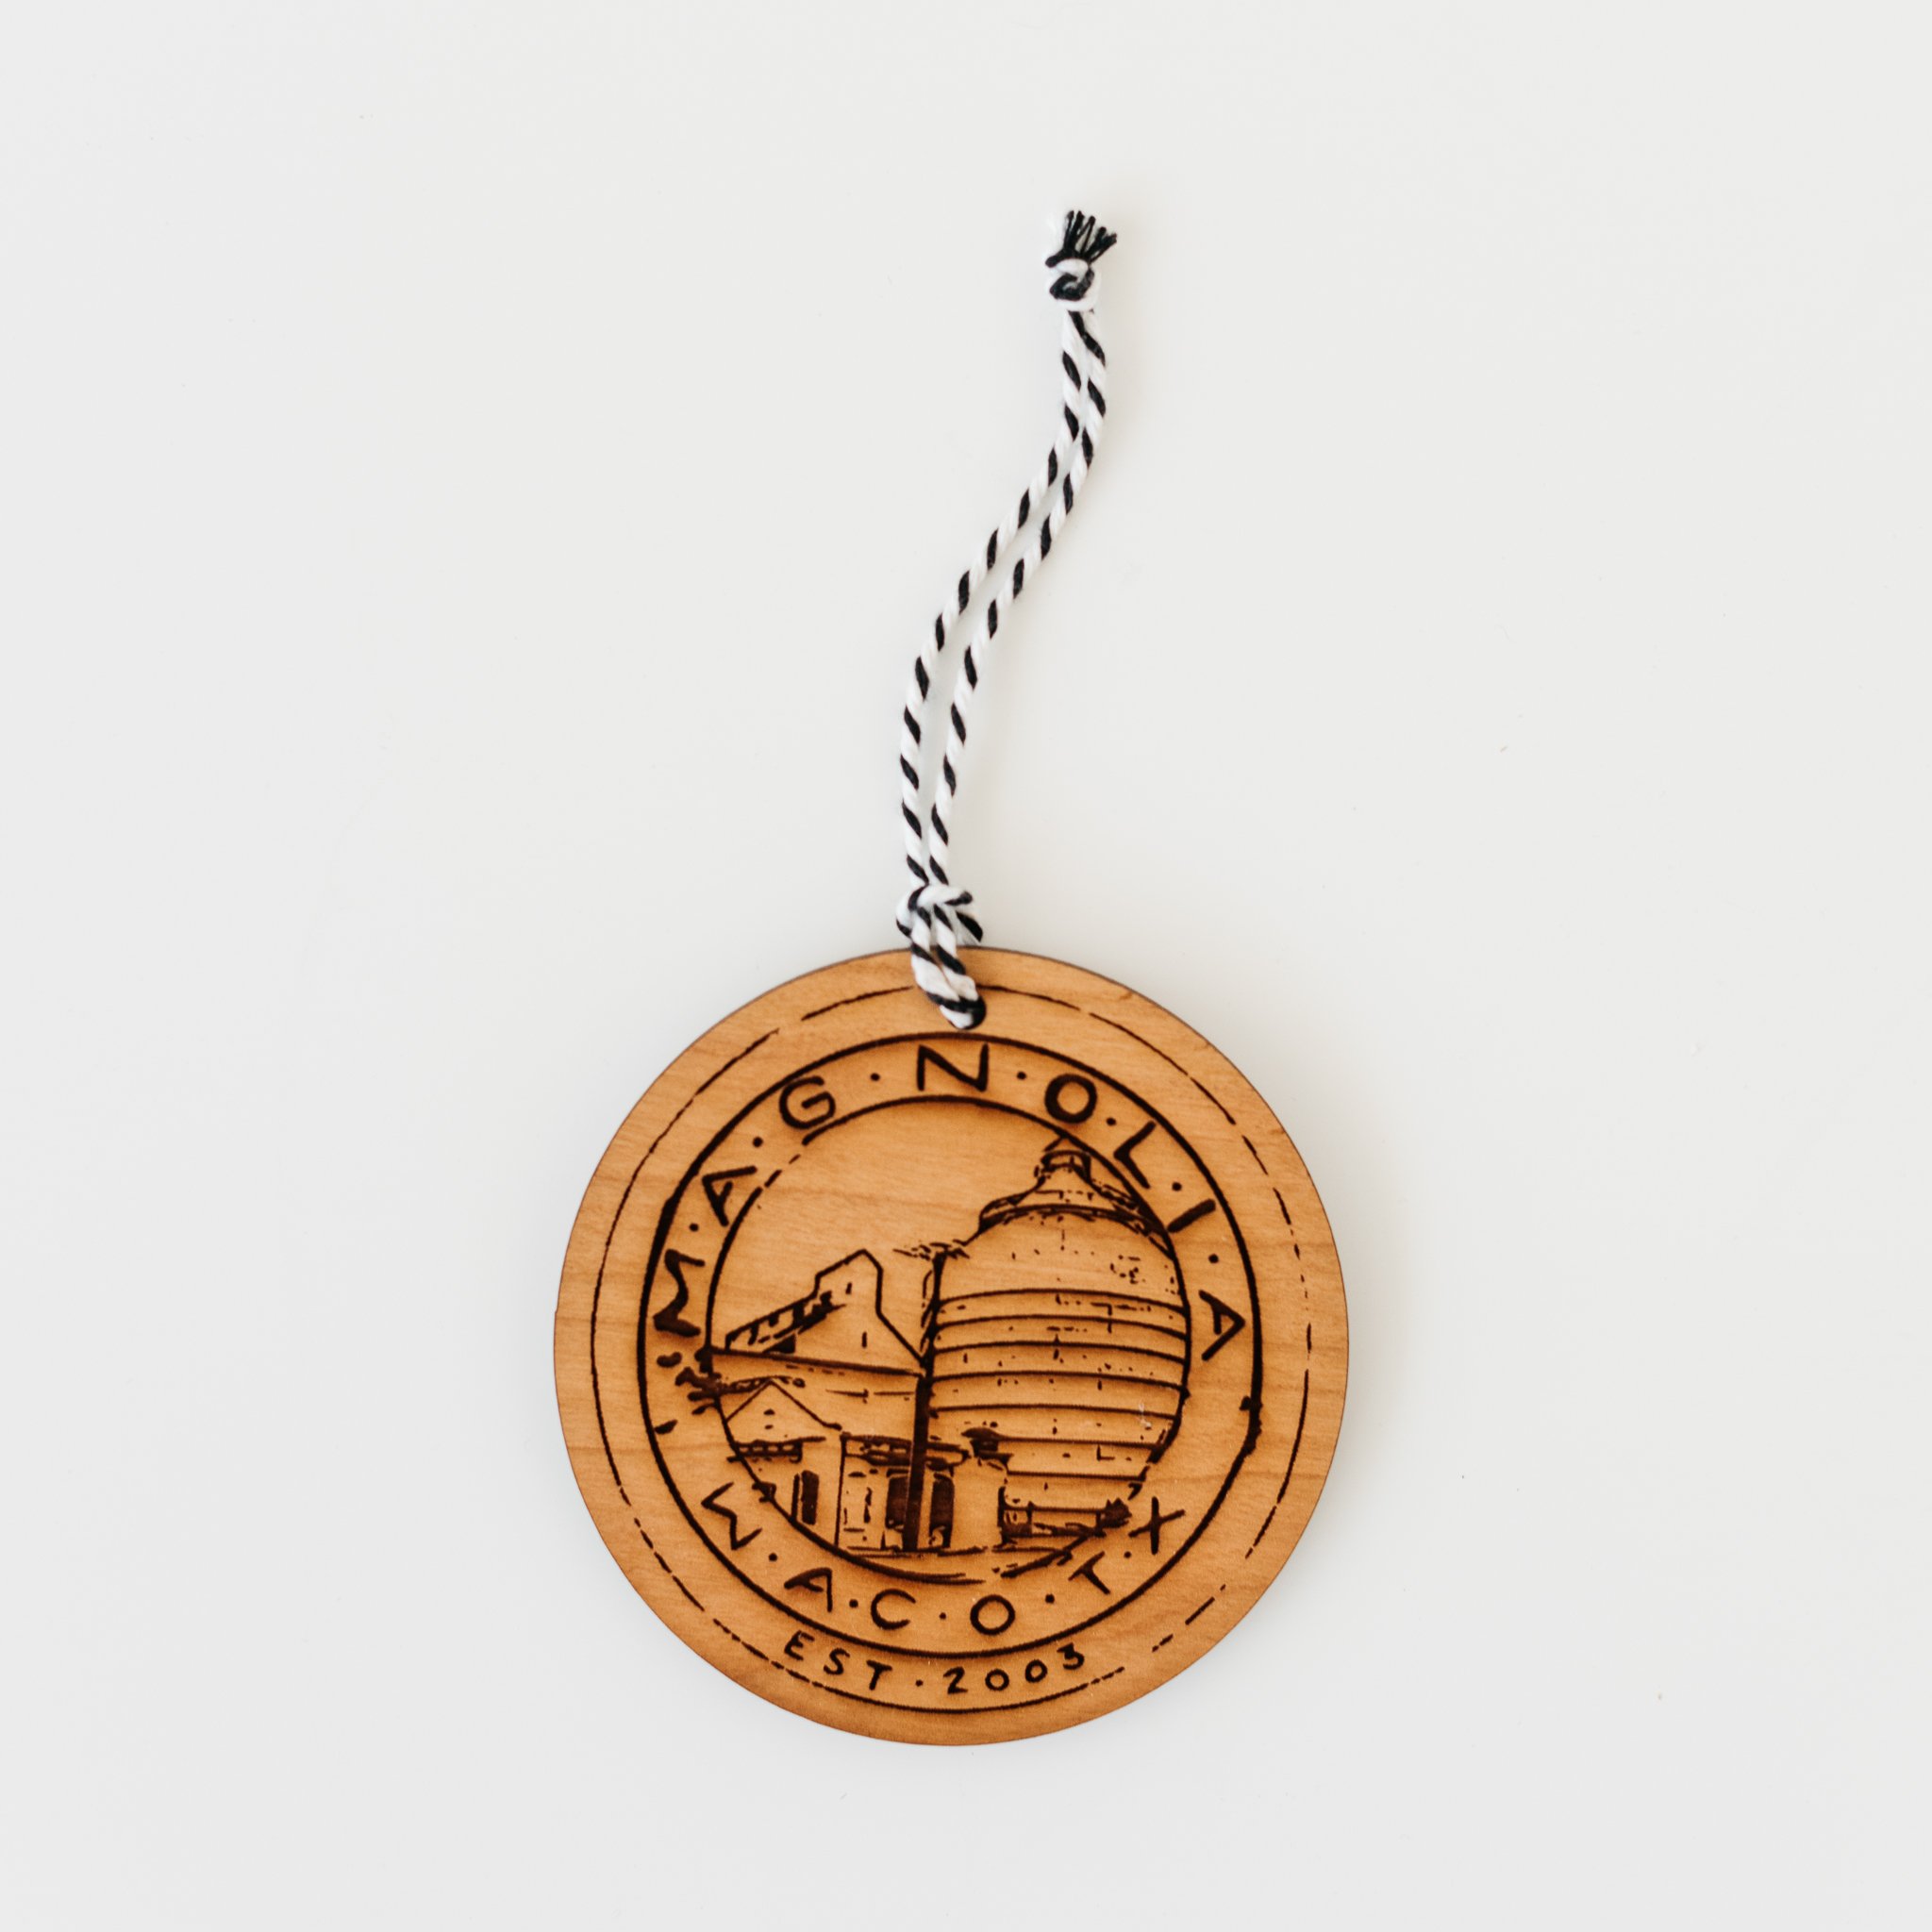 wooden laser-engraved christmas ornament of the magnolia silos seal $6.00